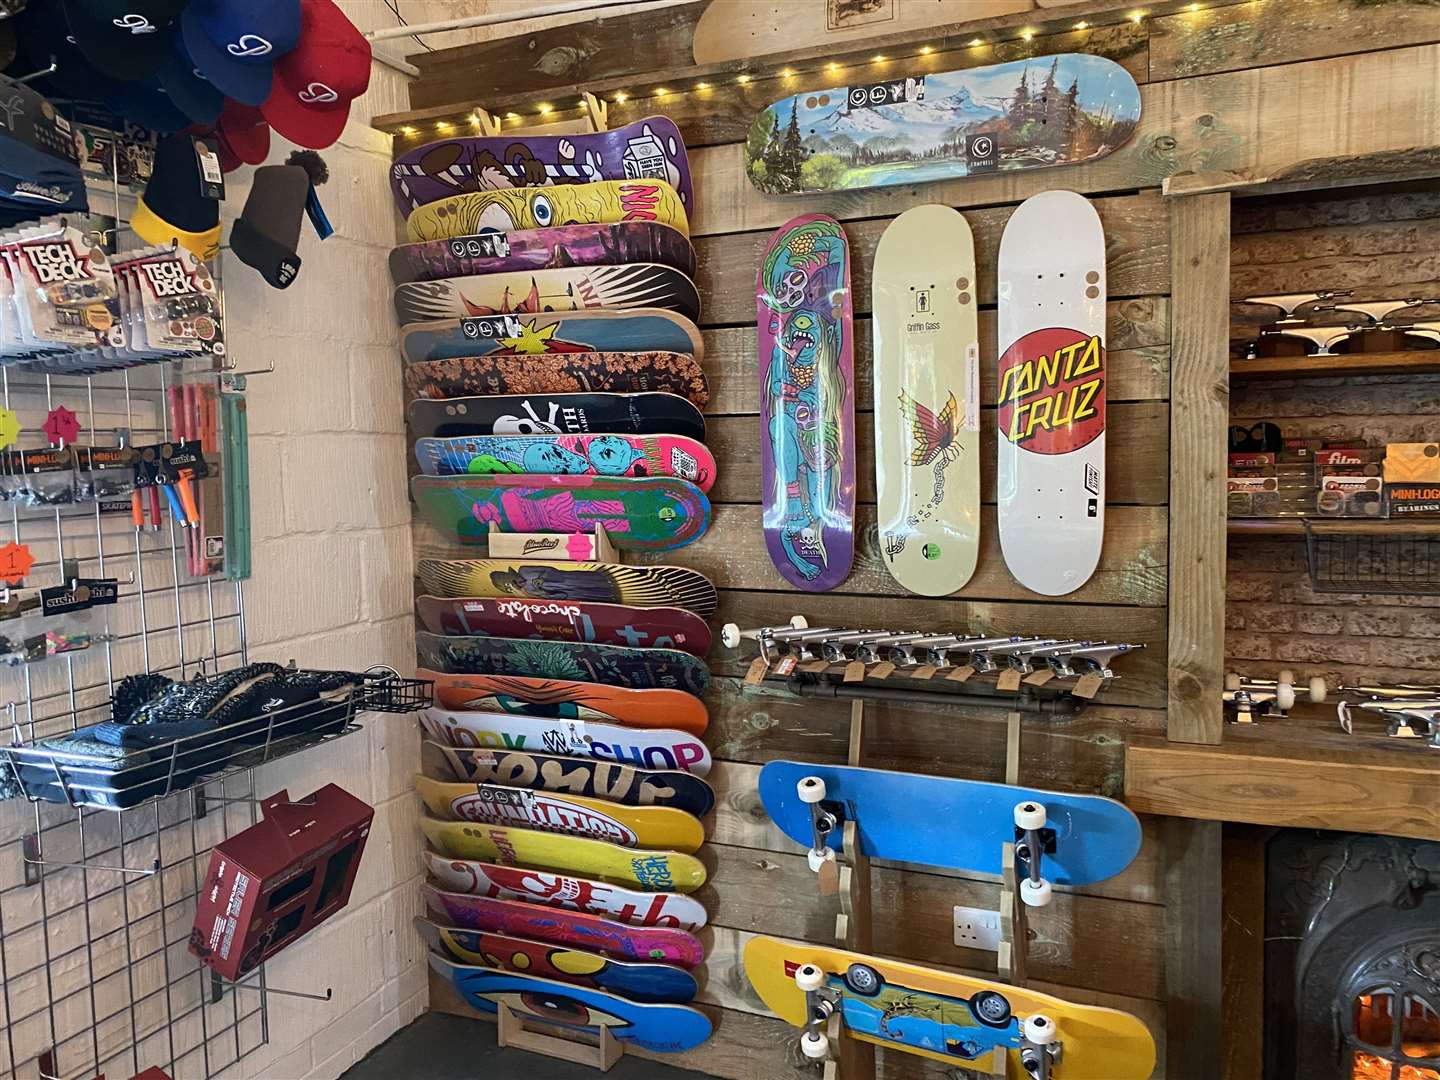 The range of skateboards on display at the shop, available to try and buy